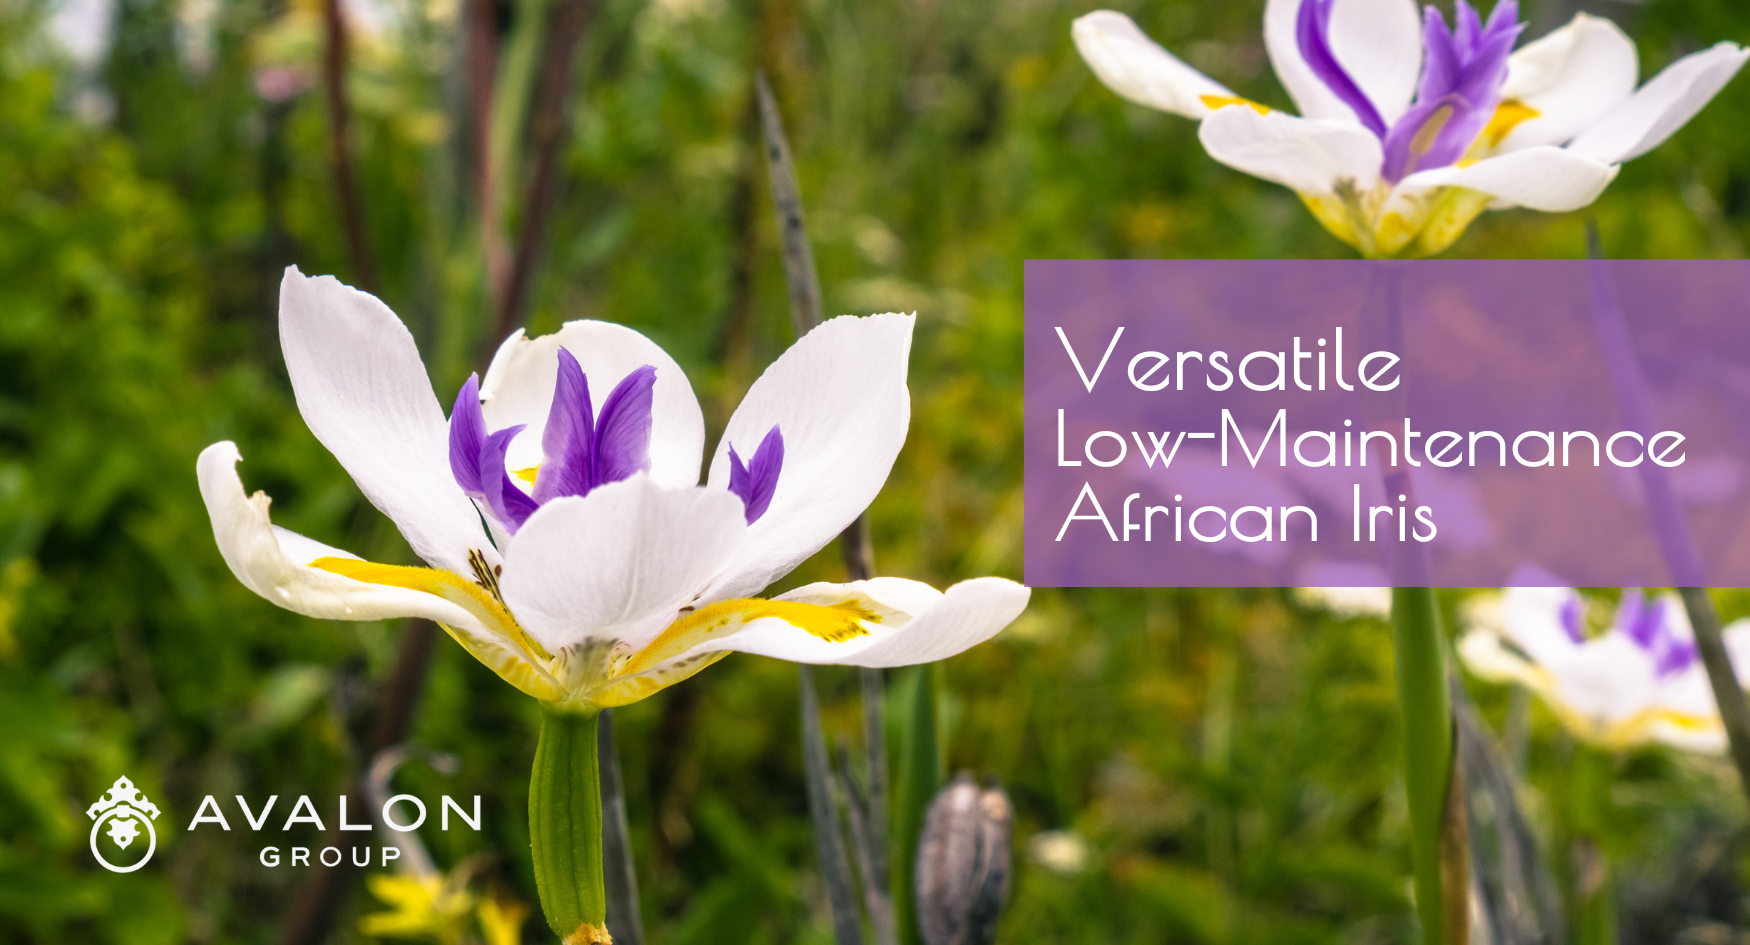 Versatile Low-Maintenance African Iris is the perfect plant to use in St Petersburg and Tampa Bay.